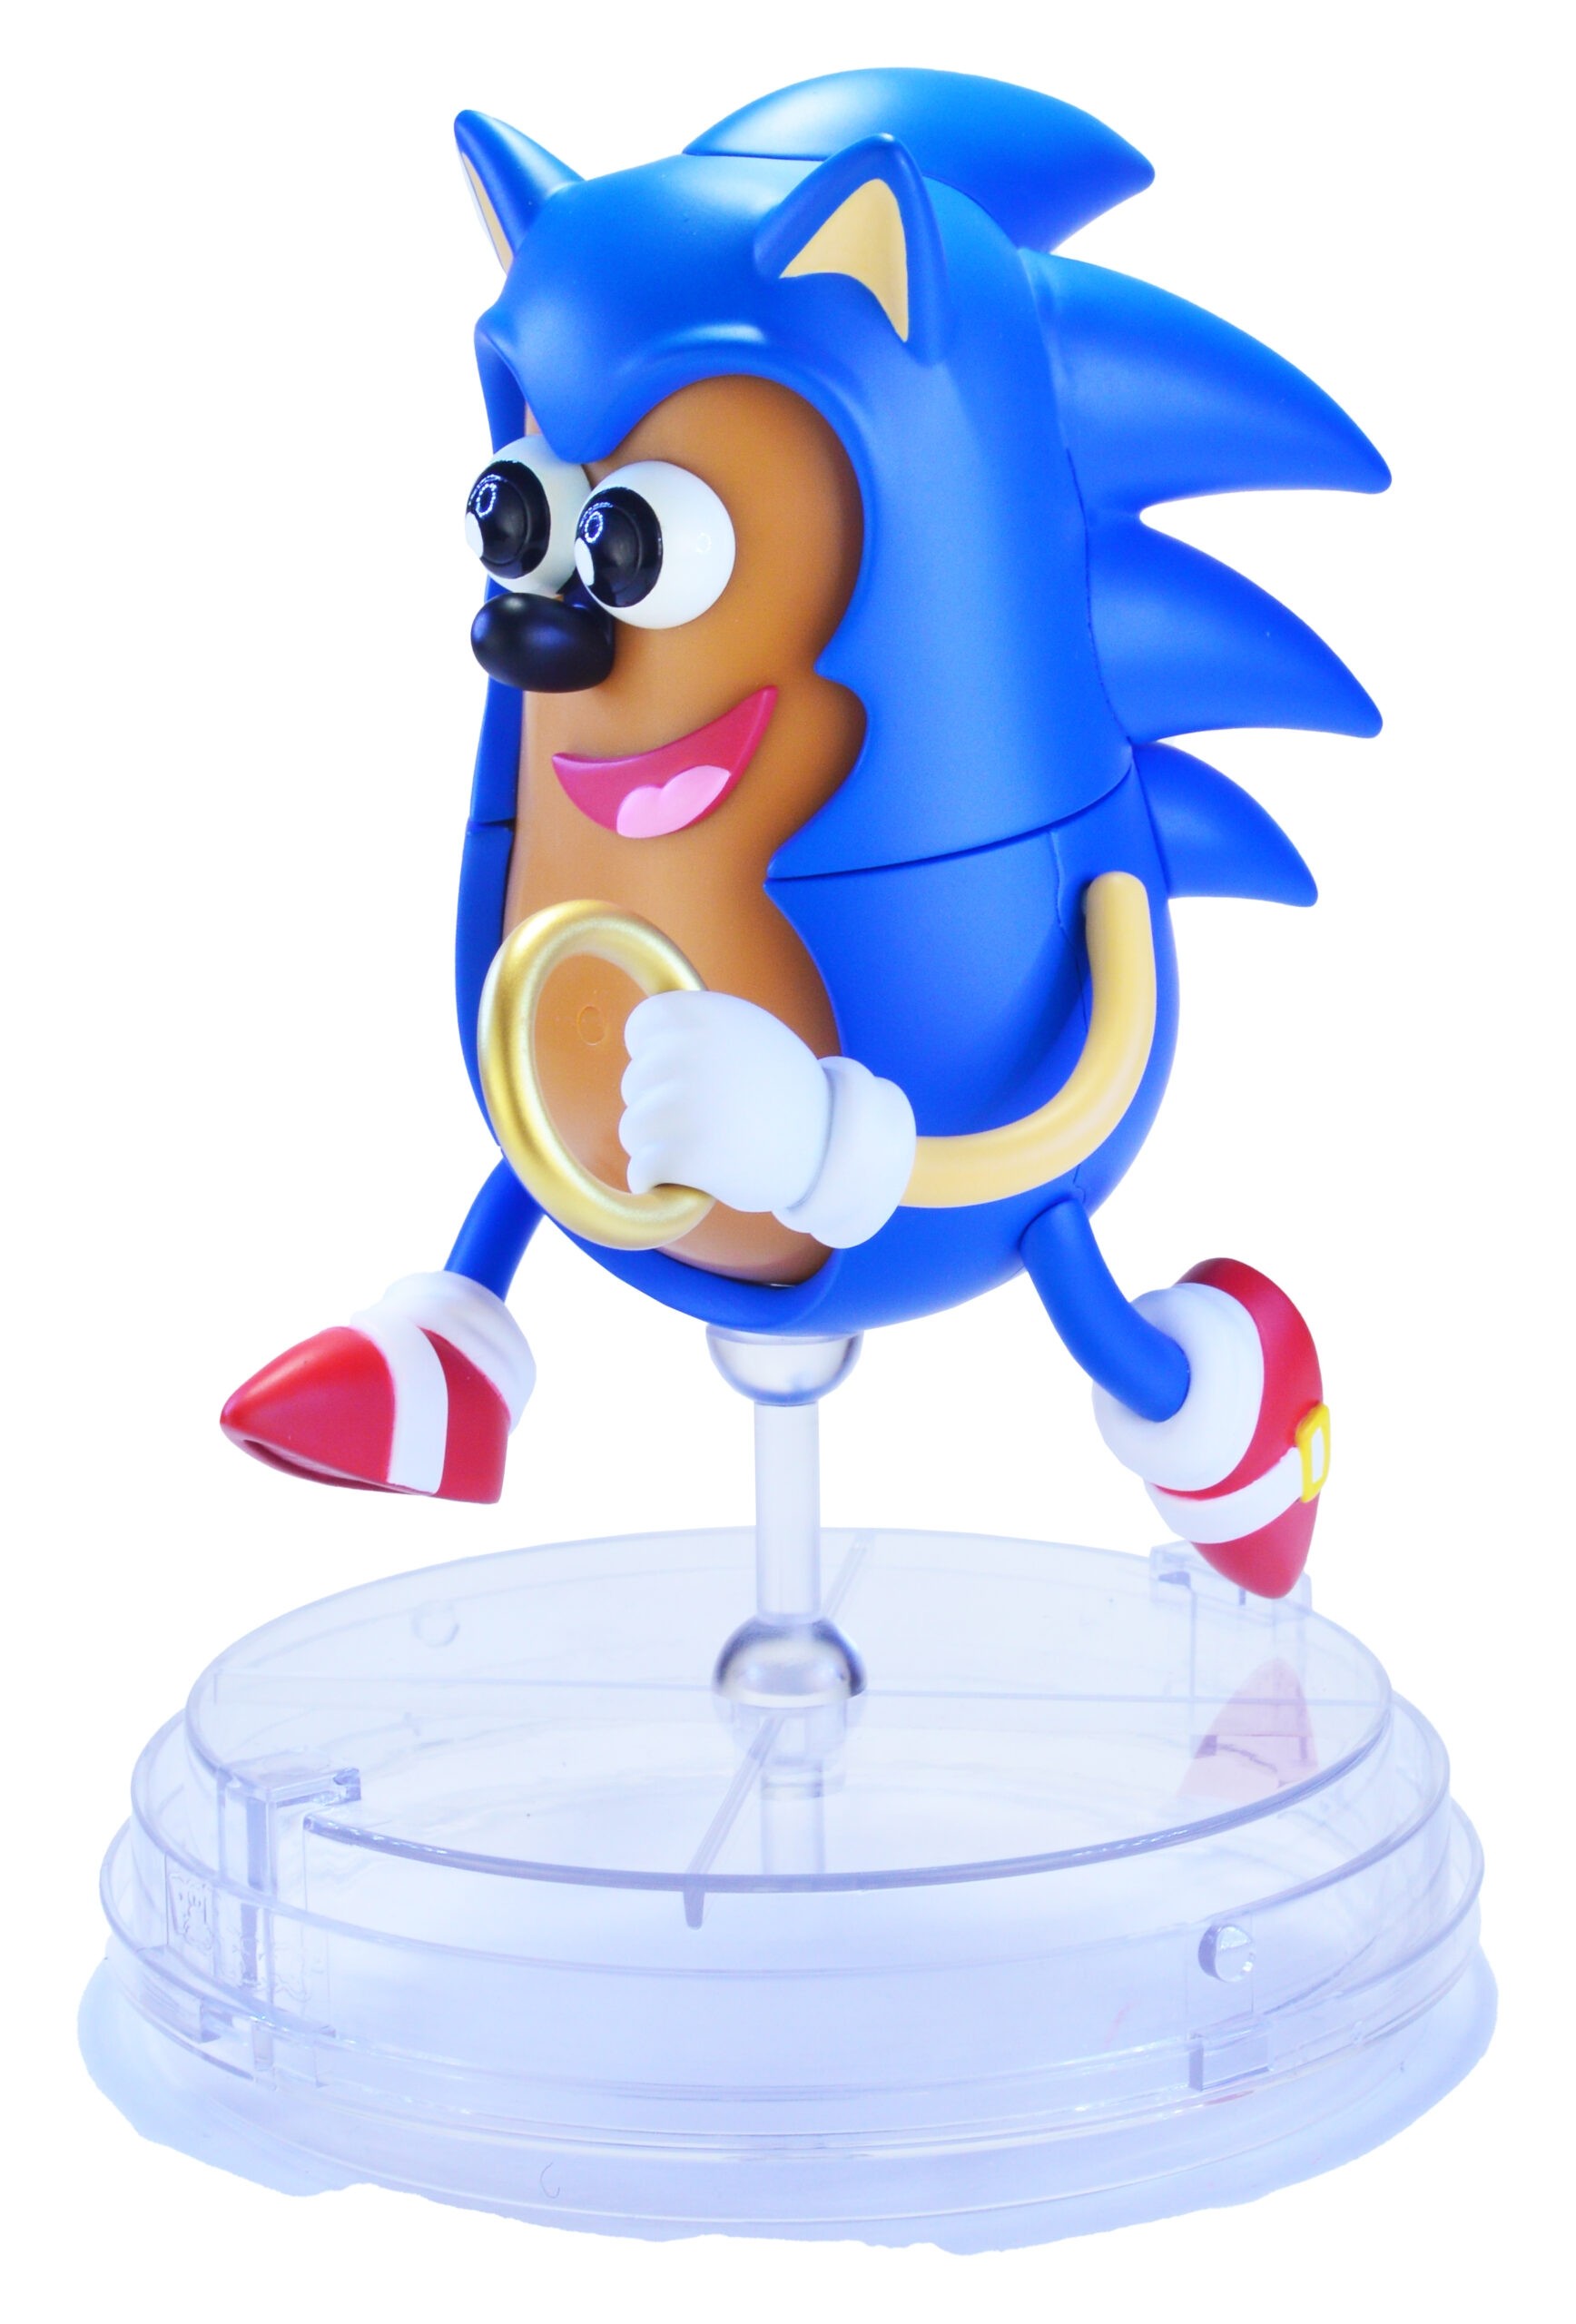 Sonic the Hedgehog - Poptaters 4" Figures (Box of 12) (April 2023 Pre-Order)